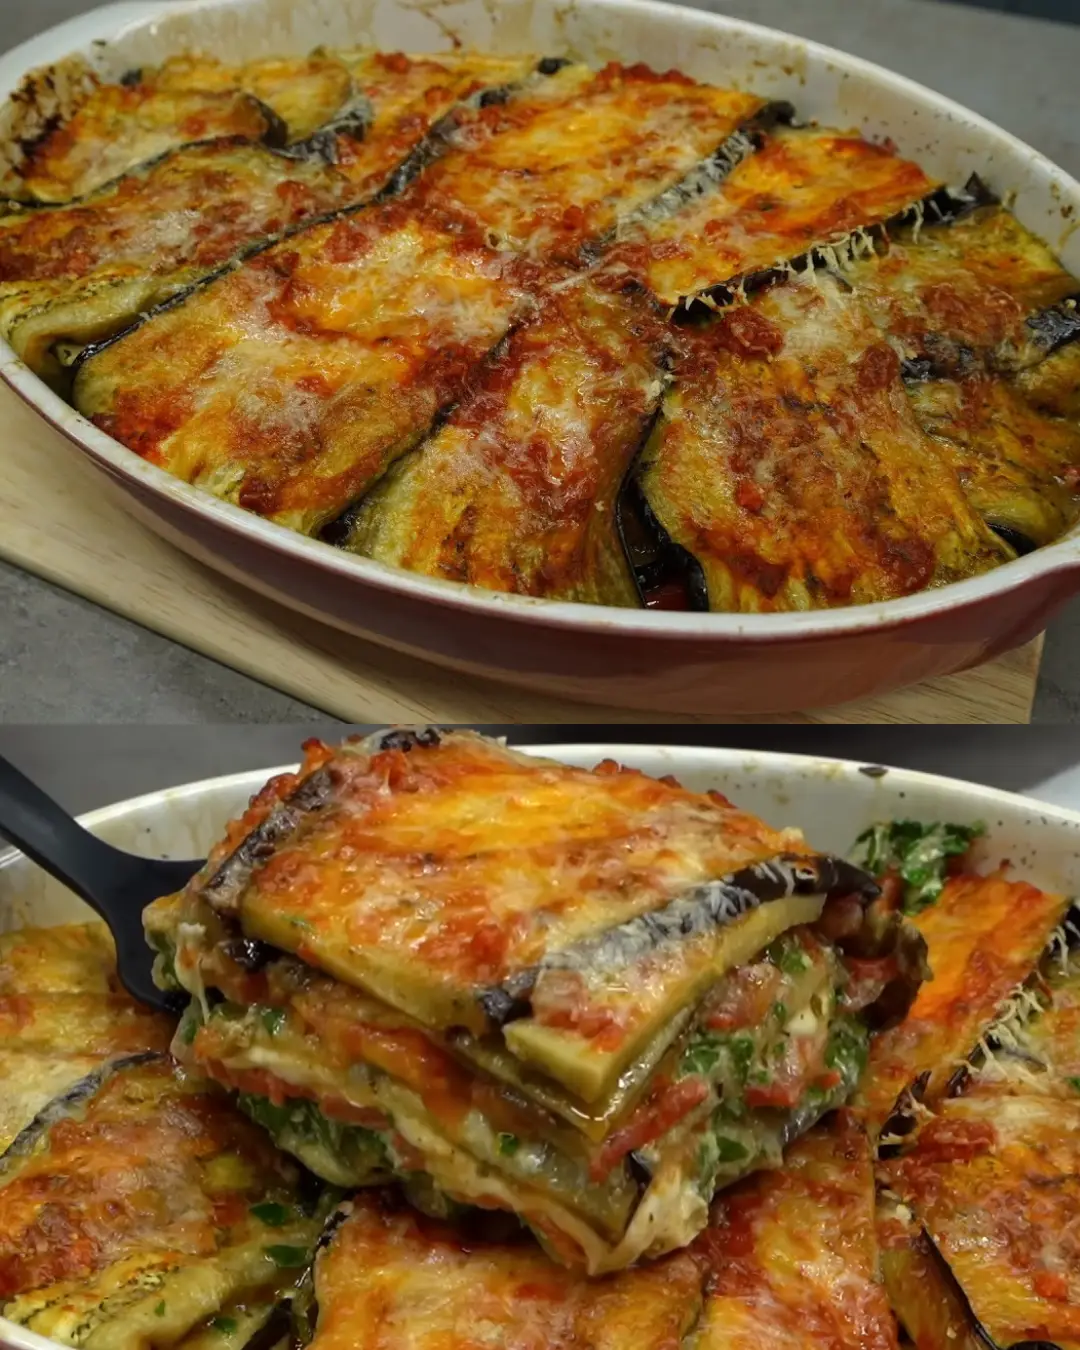 Everyone loved this easy eggplant dish!